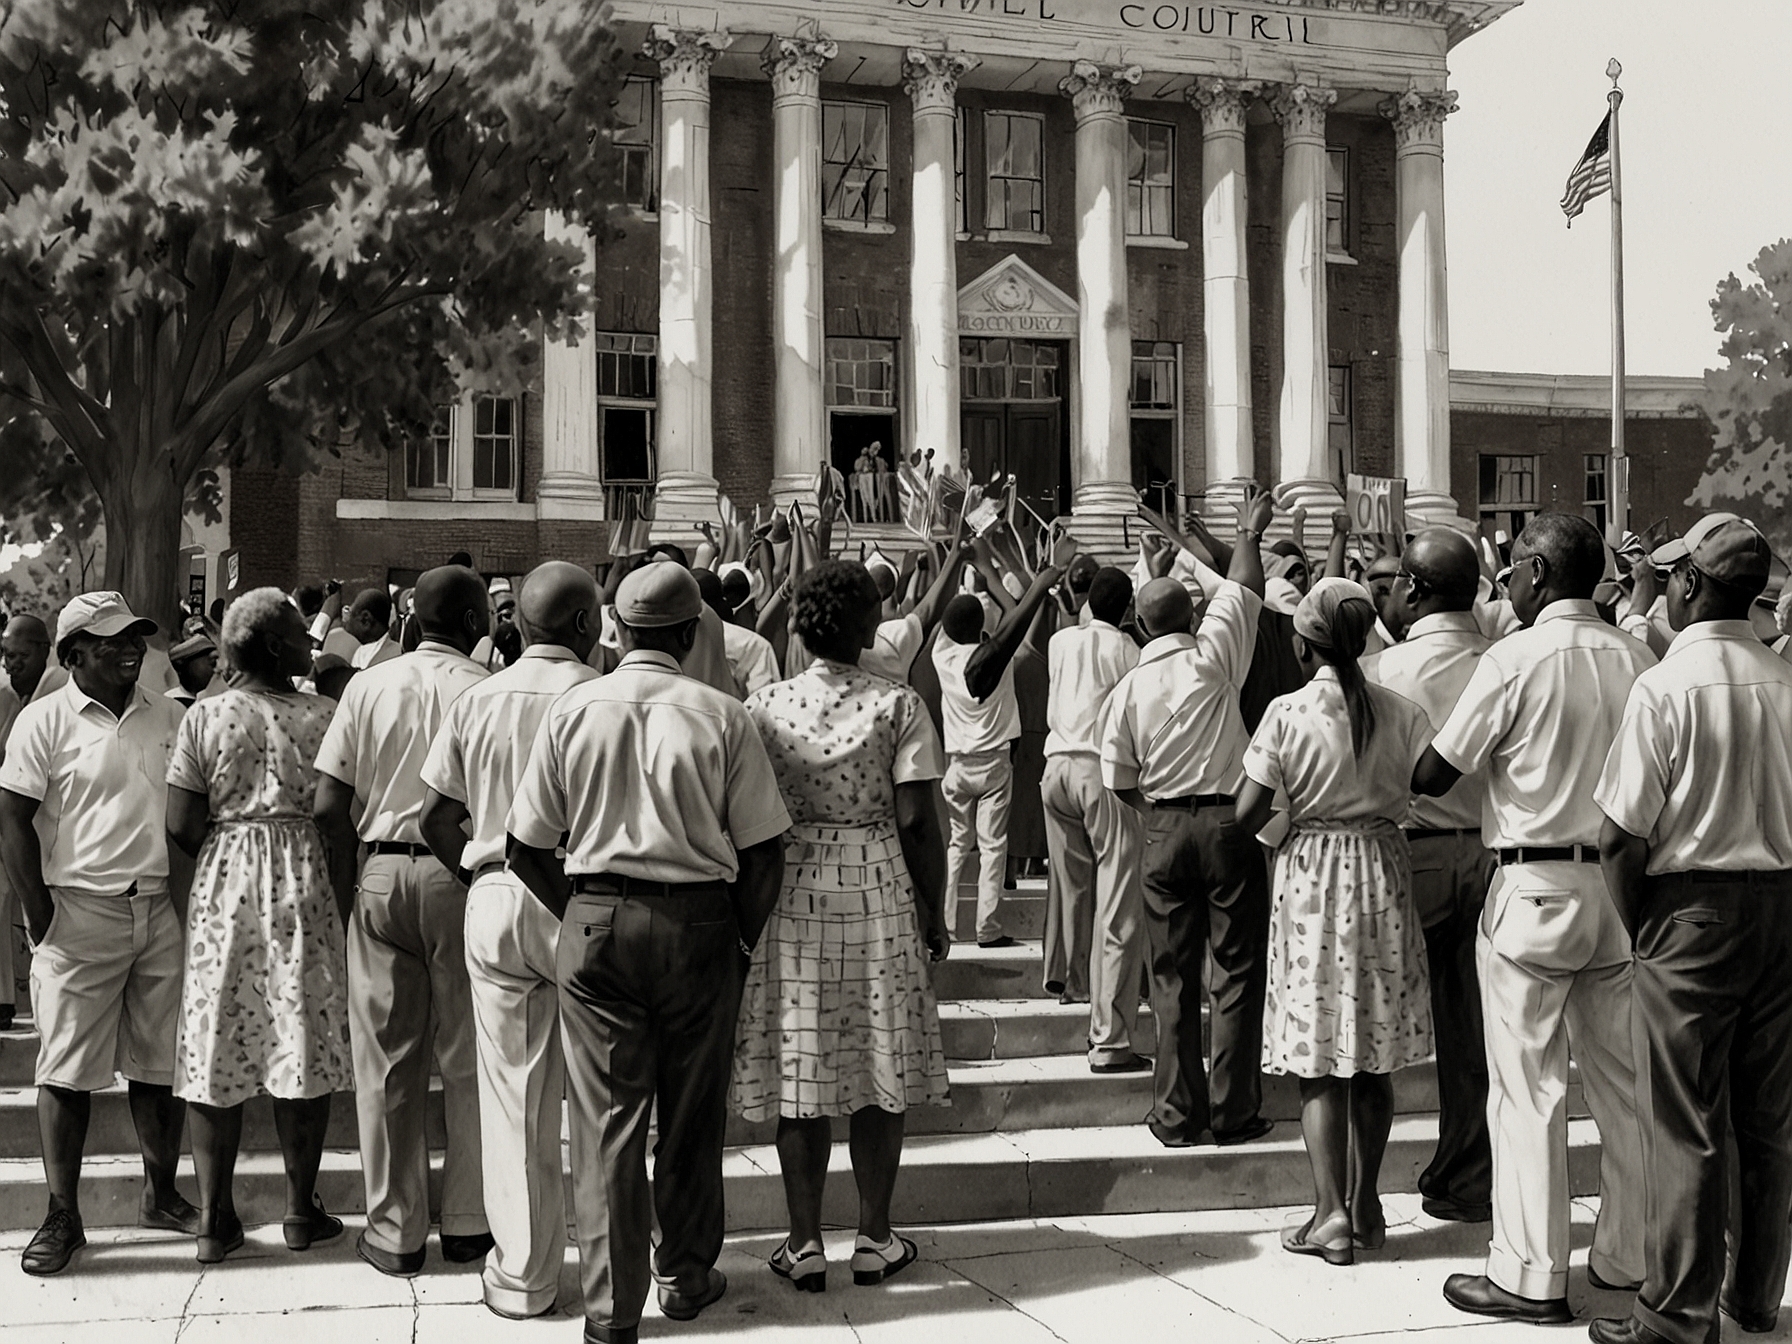 Residents of Newbern, Alabama, celebrate outside the courthouse after a ruling that restores their voting rights, marking the first time in decades they can participate in municipal elections.